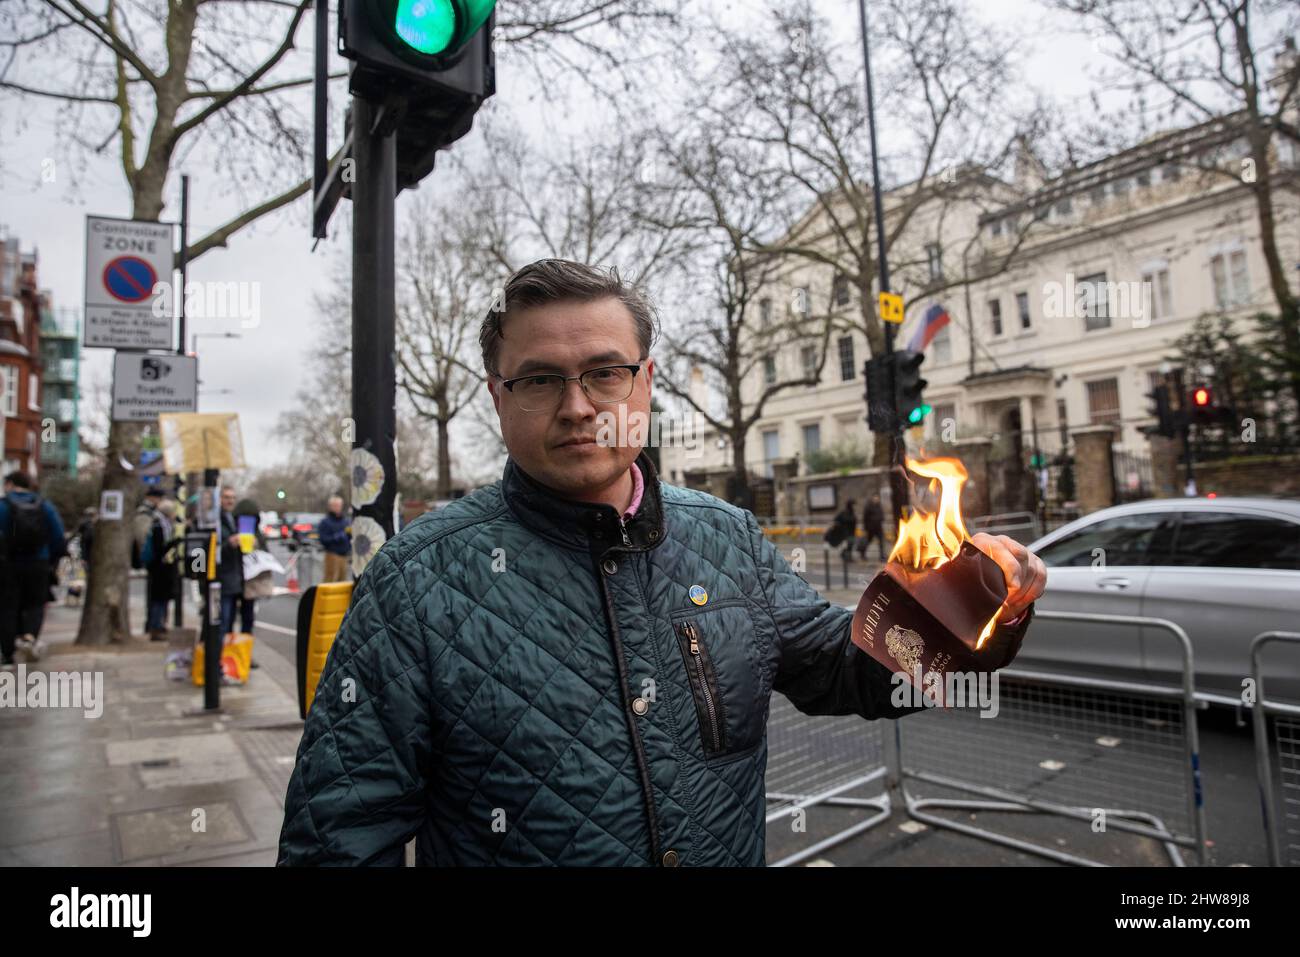 A Russian citizen burns his Russian passport outside the Russian London Embassy in protest against the invasion of Ukraine by the Russian dictator Vladmir Putin. Bayswater, London, UK 04th March 2022 Credit: Jeff Gilbert/Alamy Live News Stock Photo